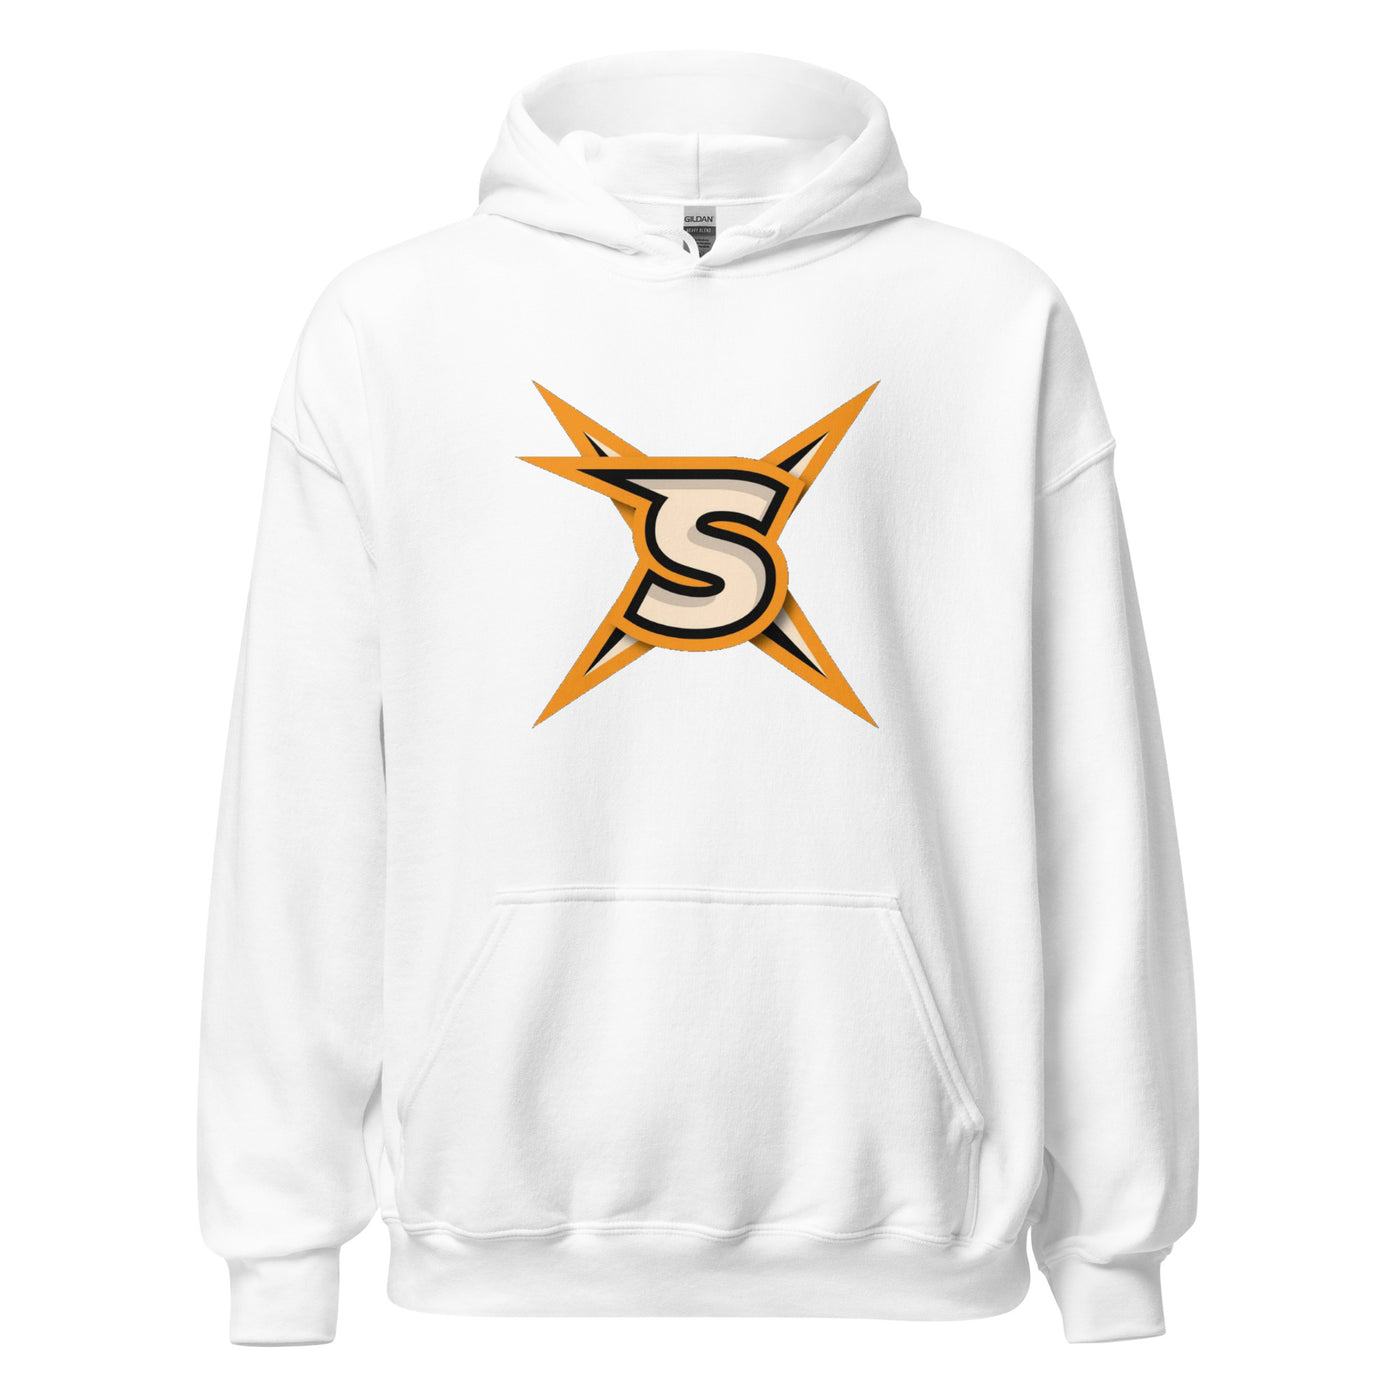 Stay Solo Unisex Hoodie